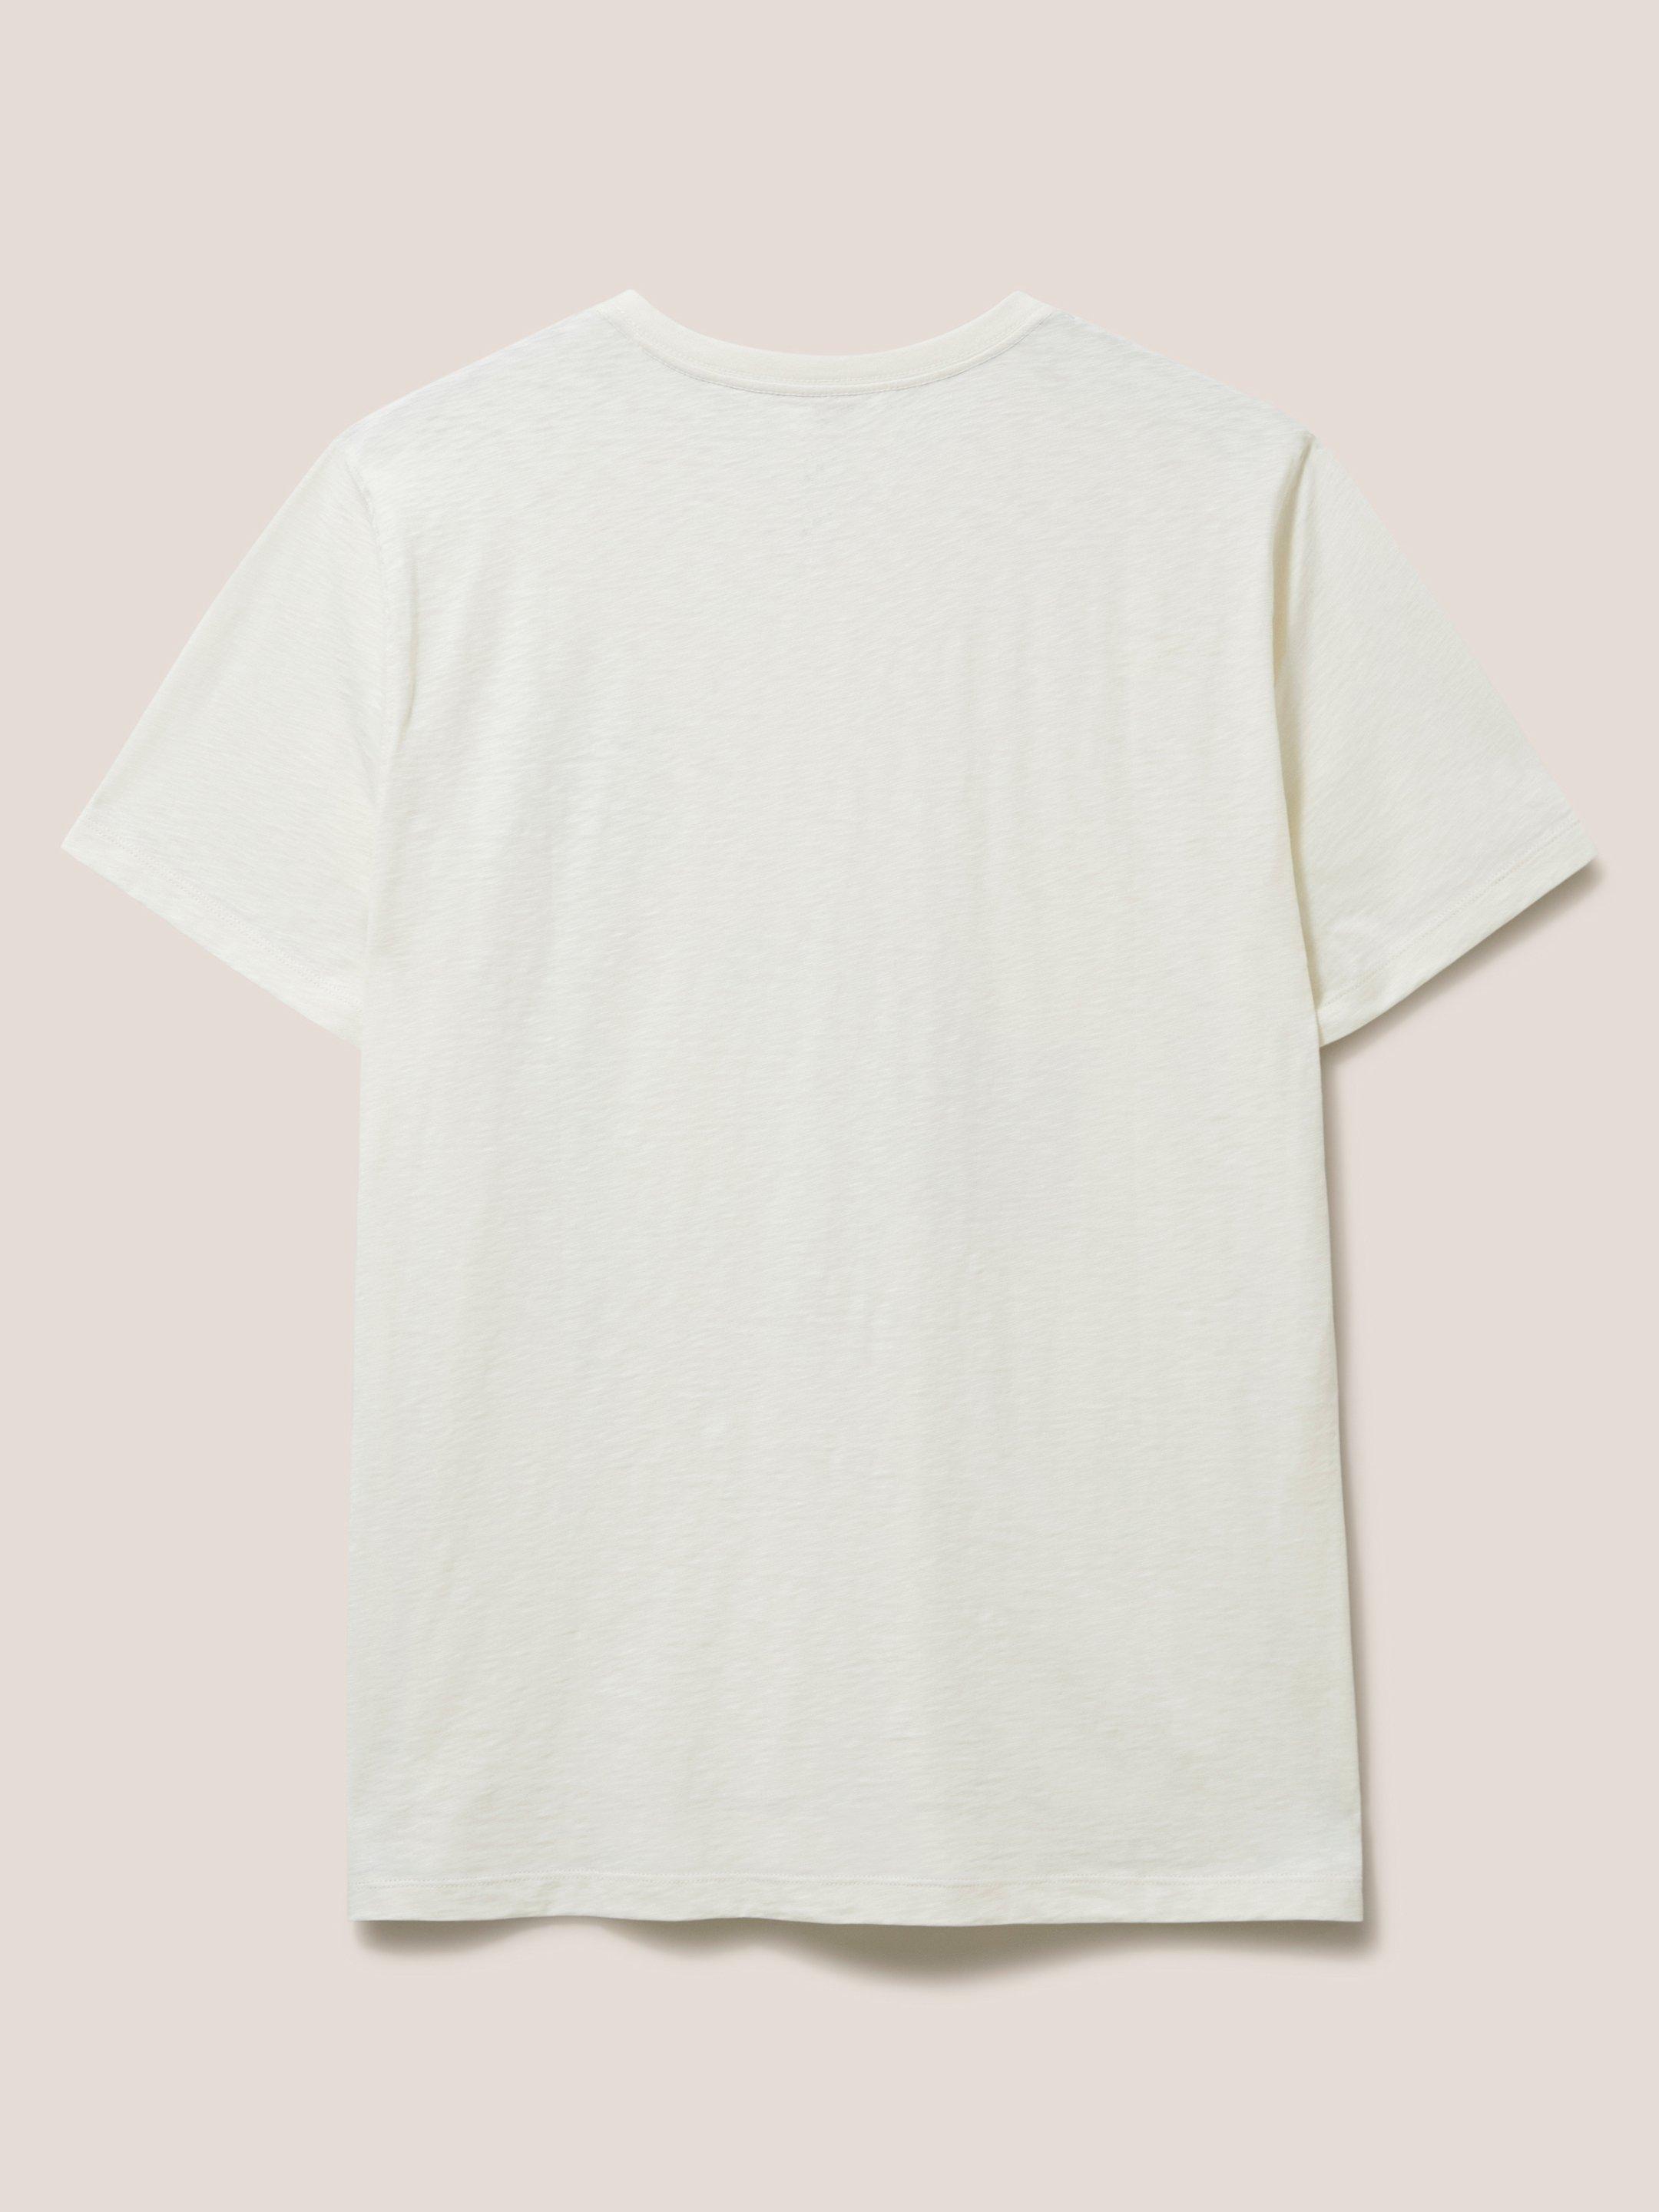 Palm Springs Graphic Tee in NAT WHITE - FLAT BACK